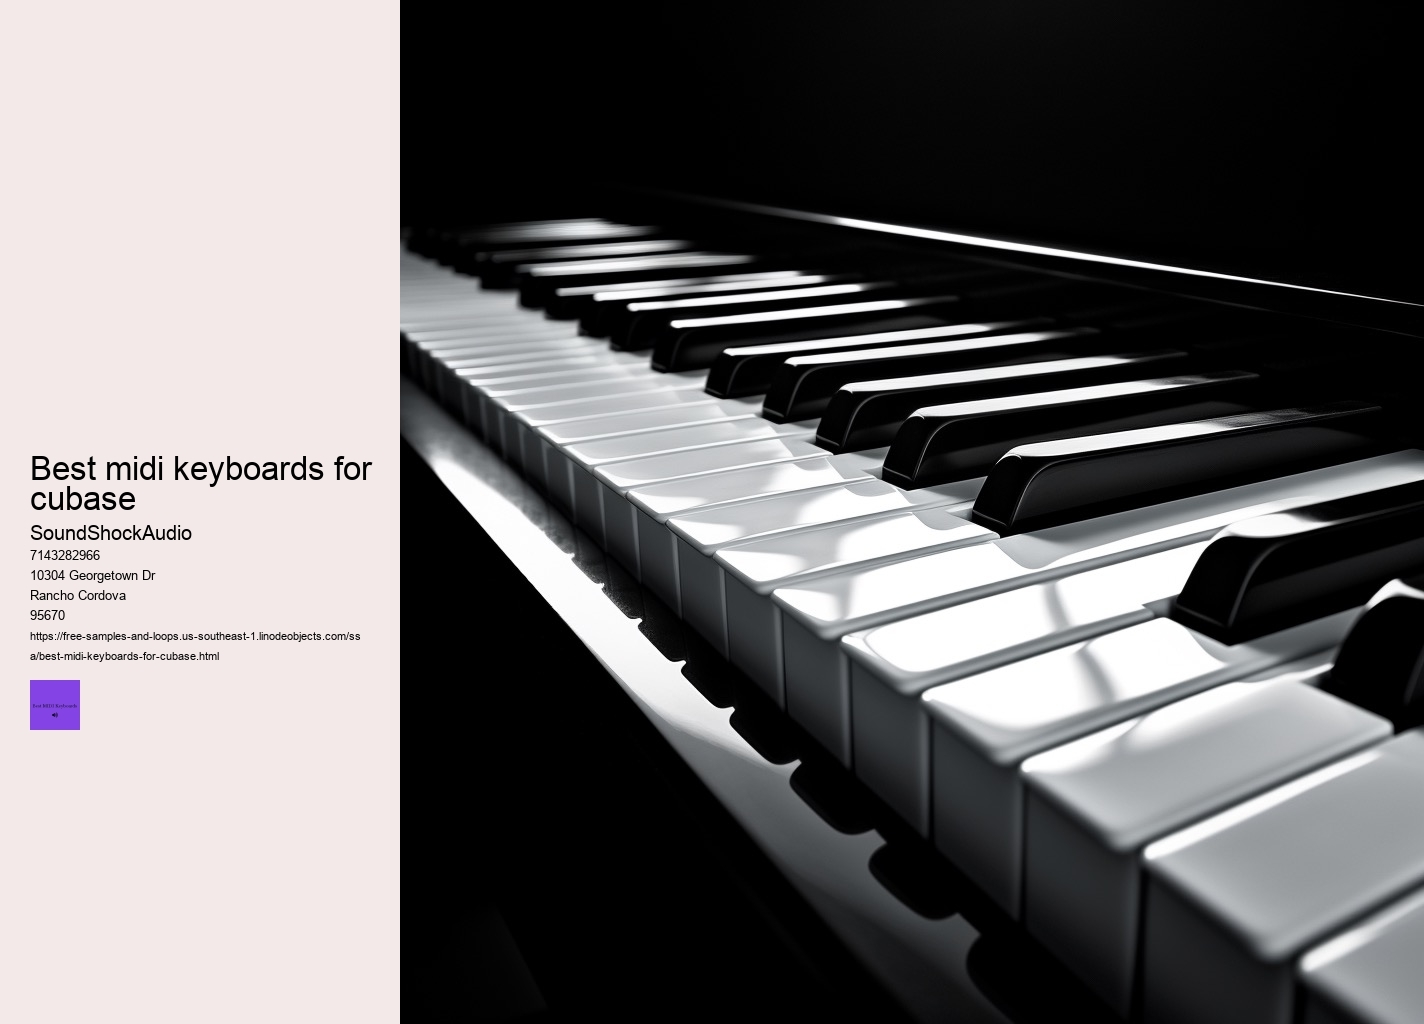 What is the difference between cheap and expensive MIDI keyboards?